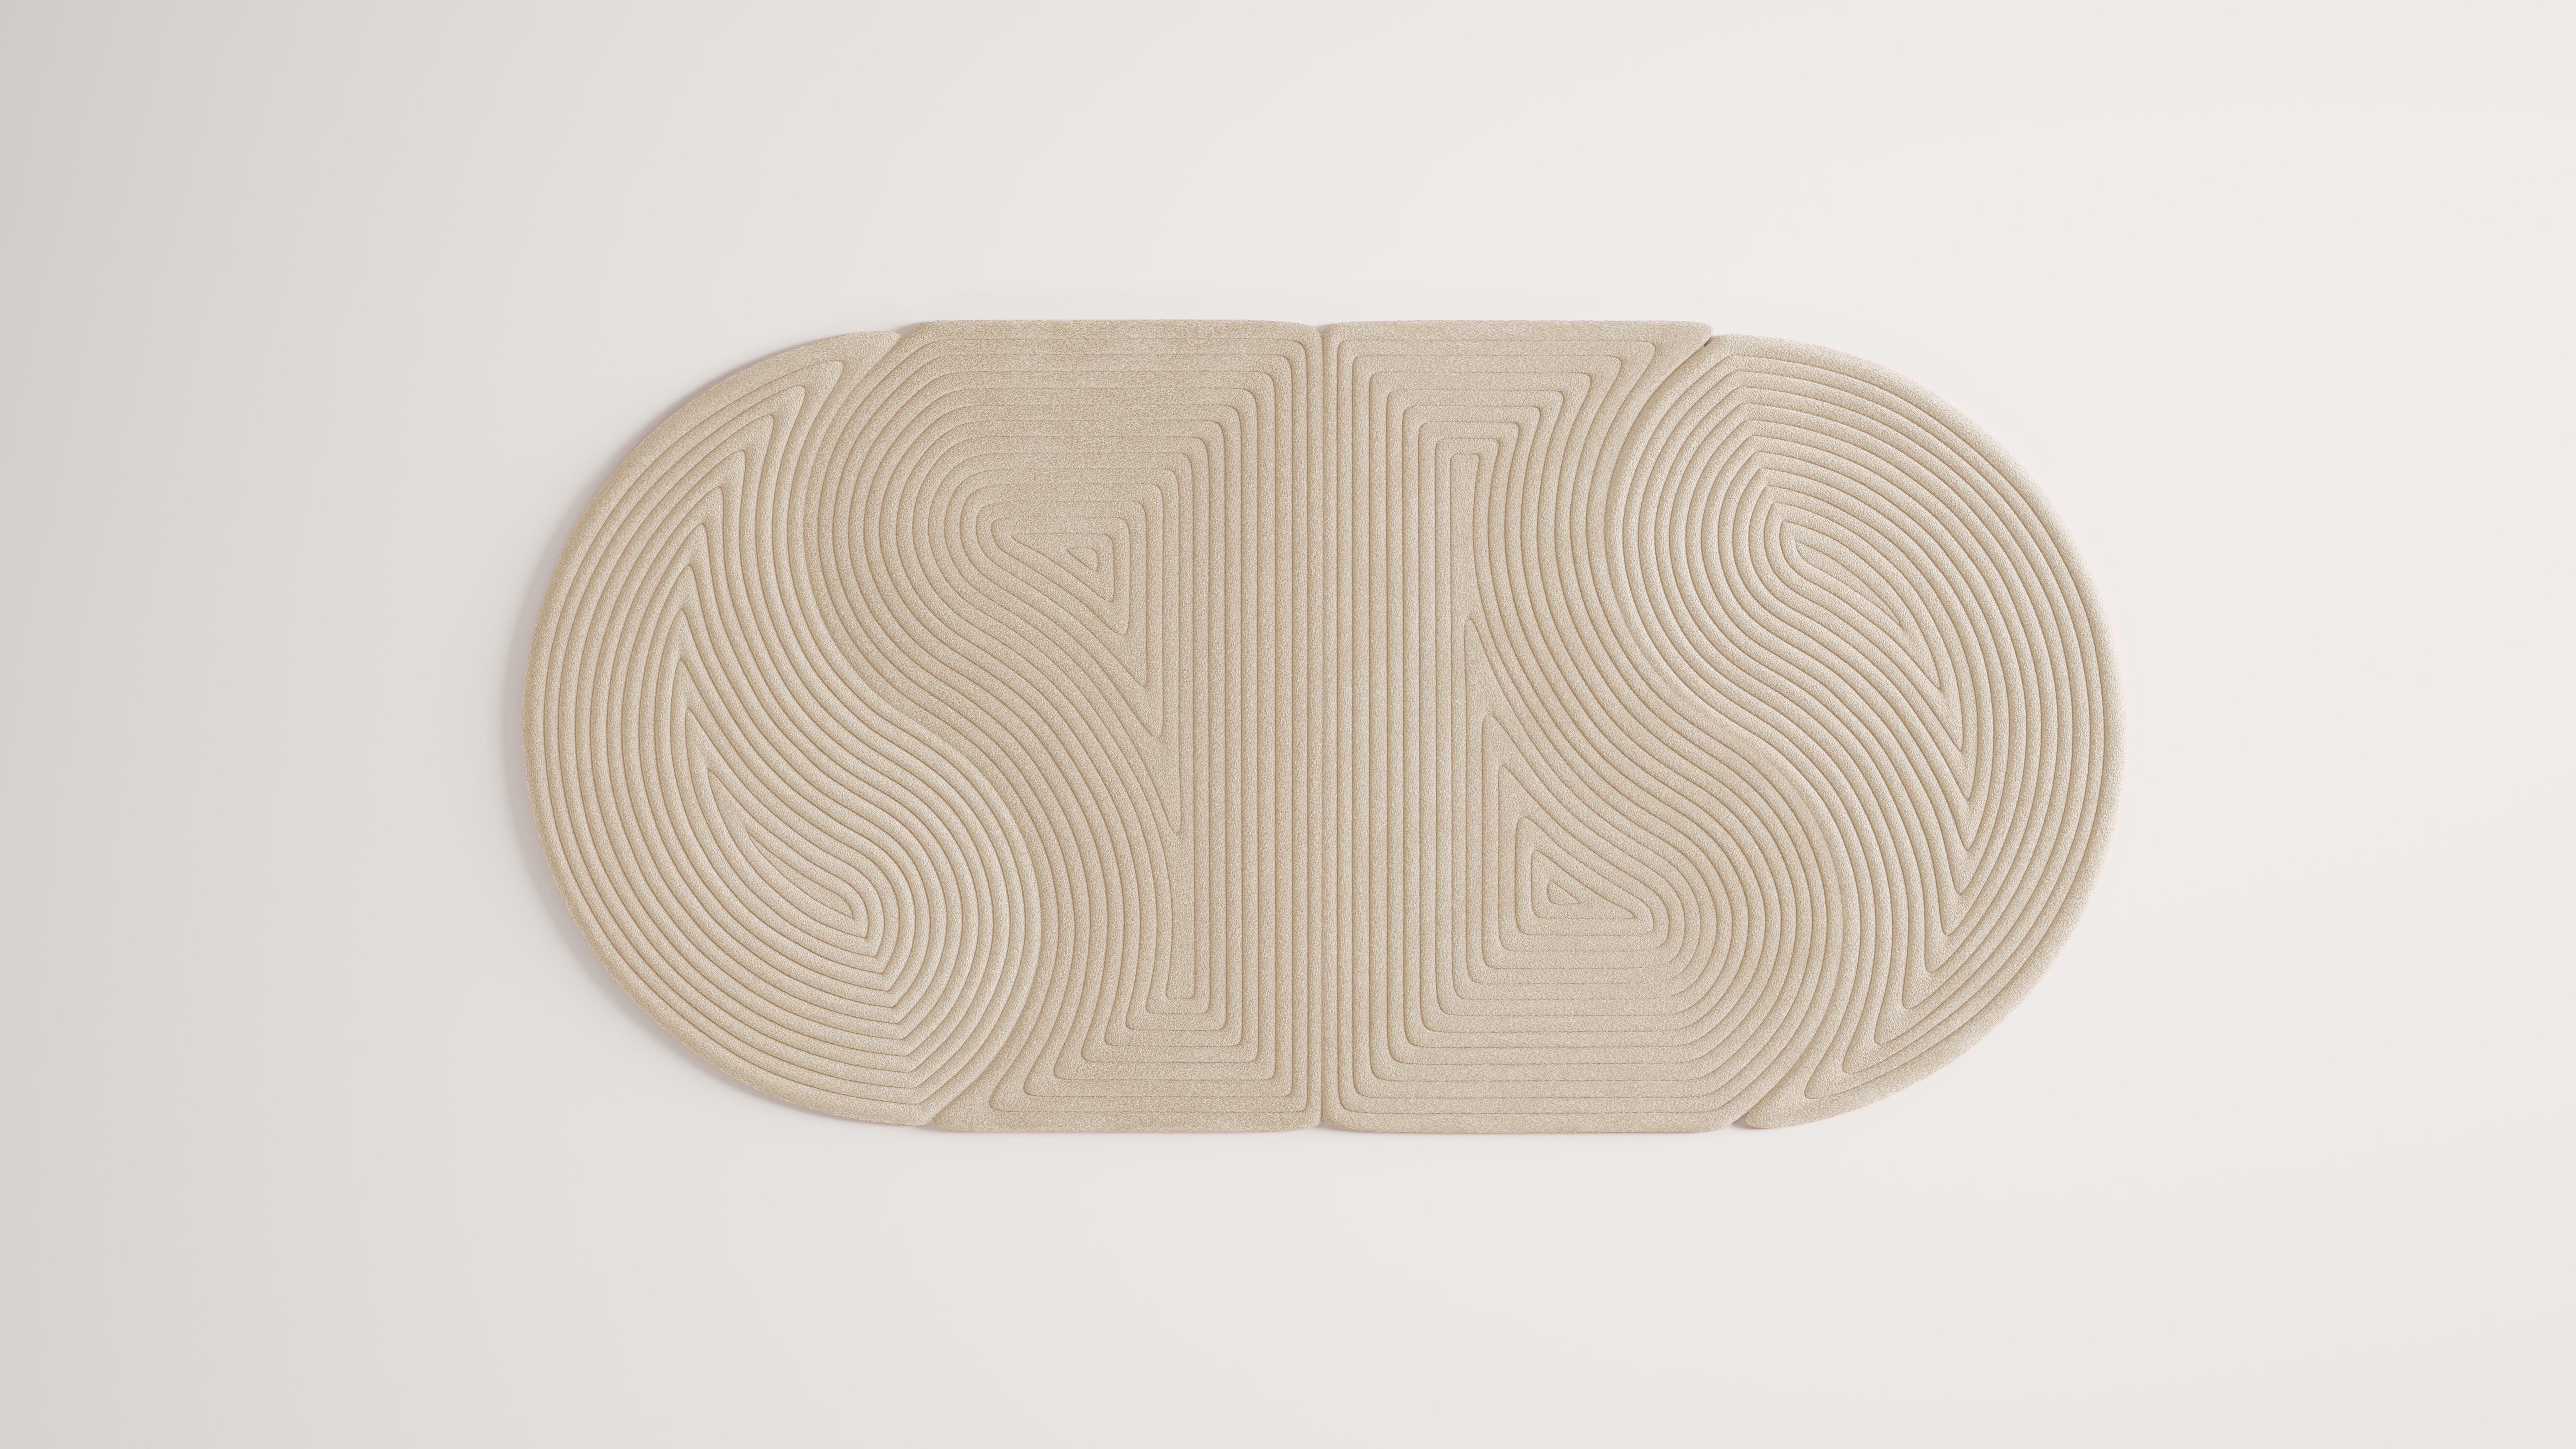 Niwa is a collection of minimal and organic modular rugs. Each module can be combined with others in endless ways to create customizable configurations. 

This collection is a representation of the sand element within Zen Gardens. The rugs provide